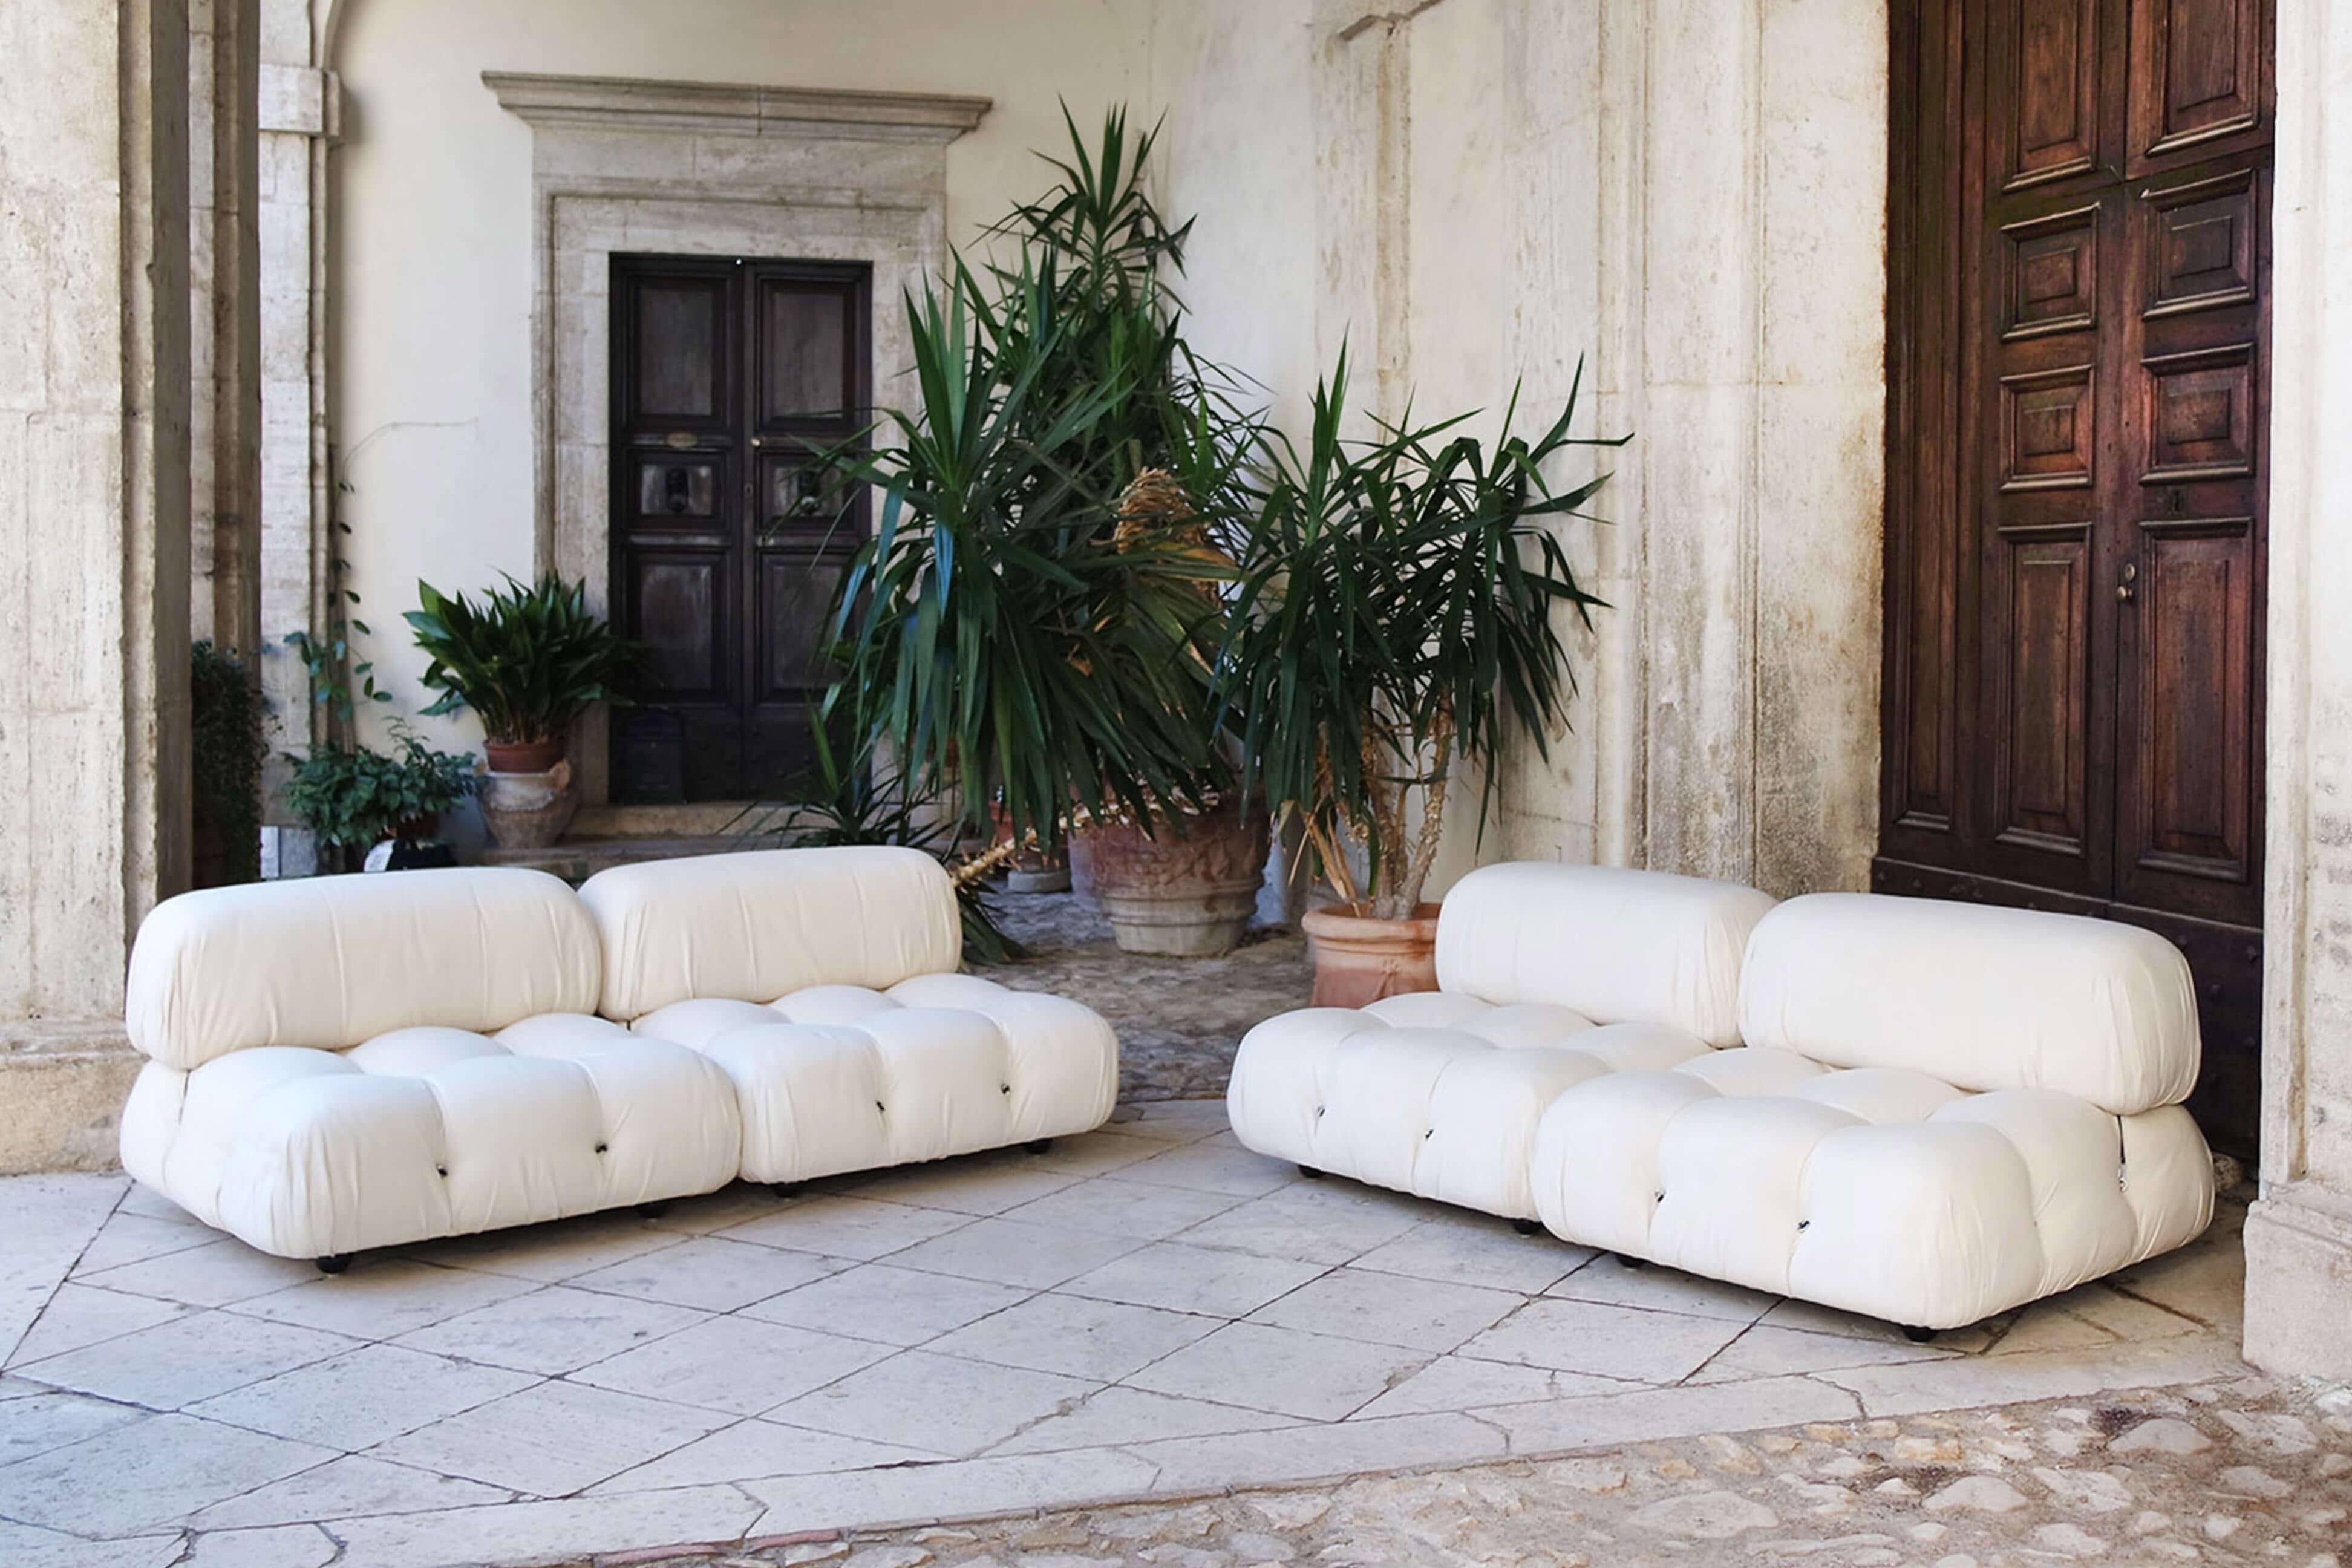 A beautiful example of an original 1970s Camaleonda sofa designed by Mario Bellini for B&B Italia in the 1970s. This iconic design piece is covered in its original thick cream cotton canvas. It has been in a private home in Forte dei Marmi for over